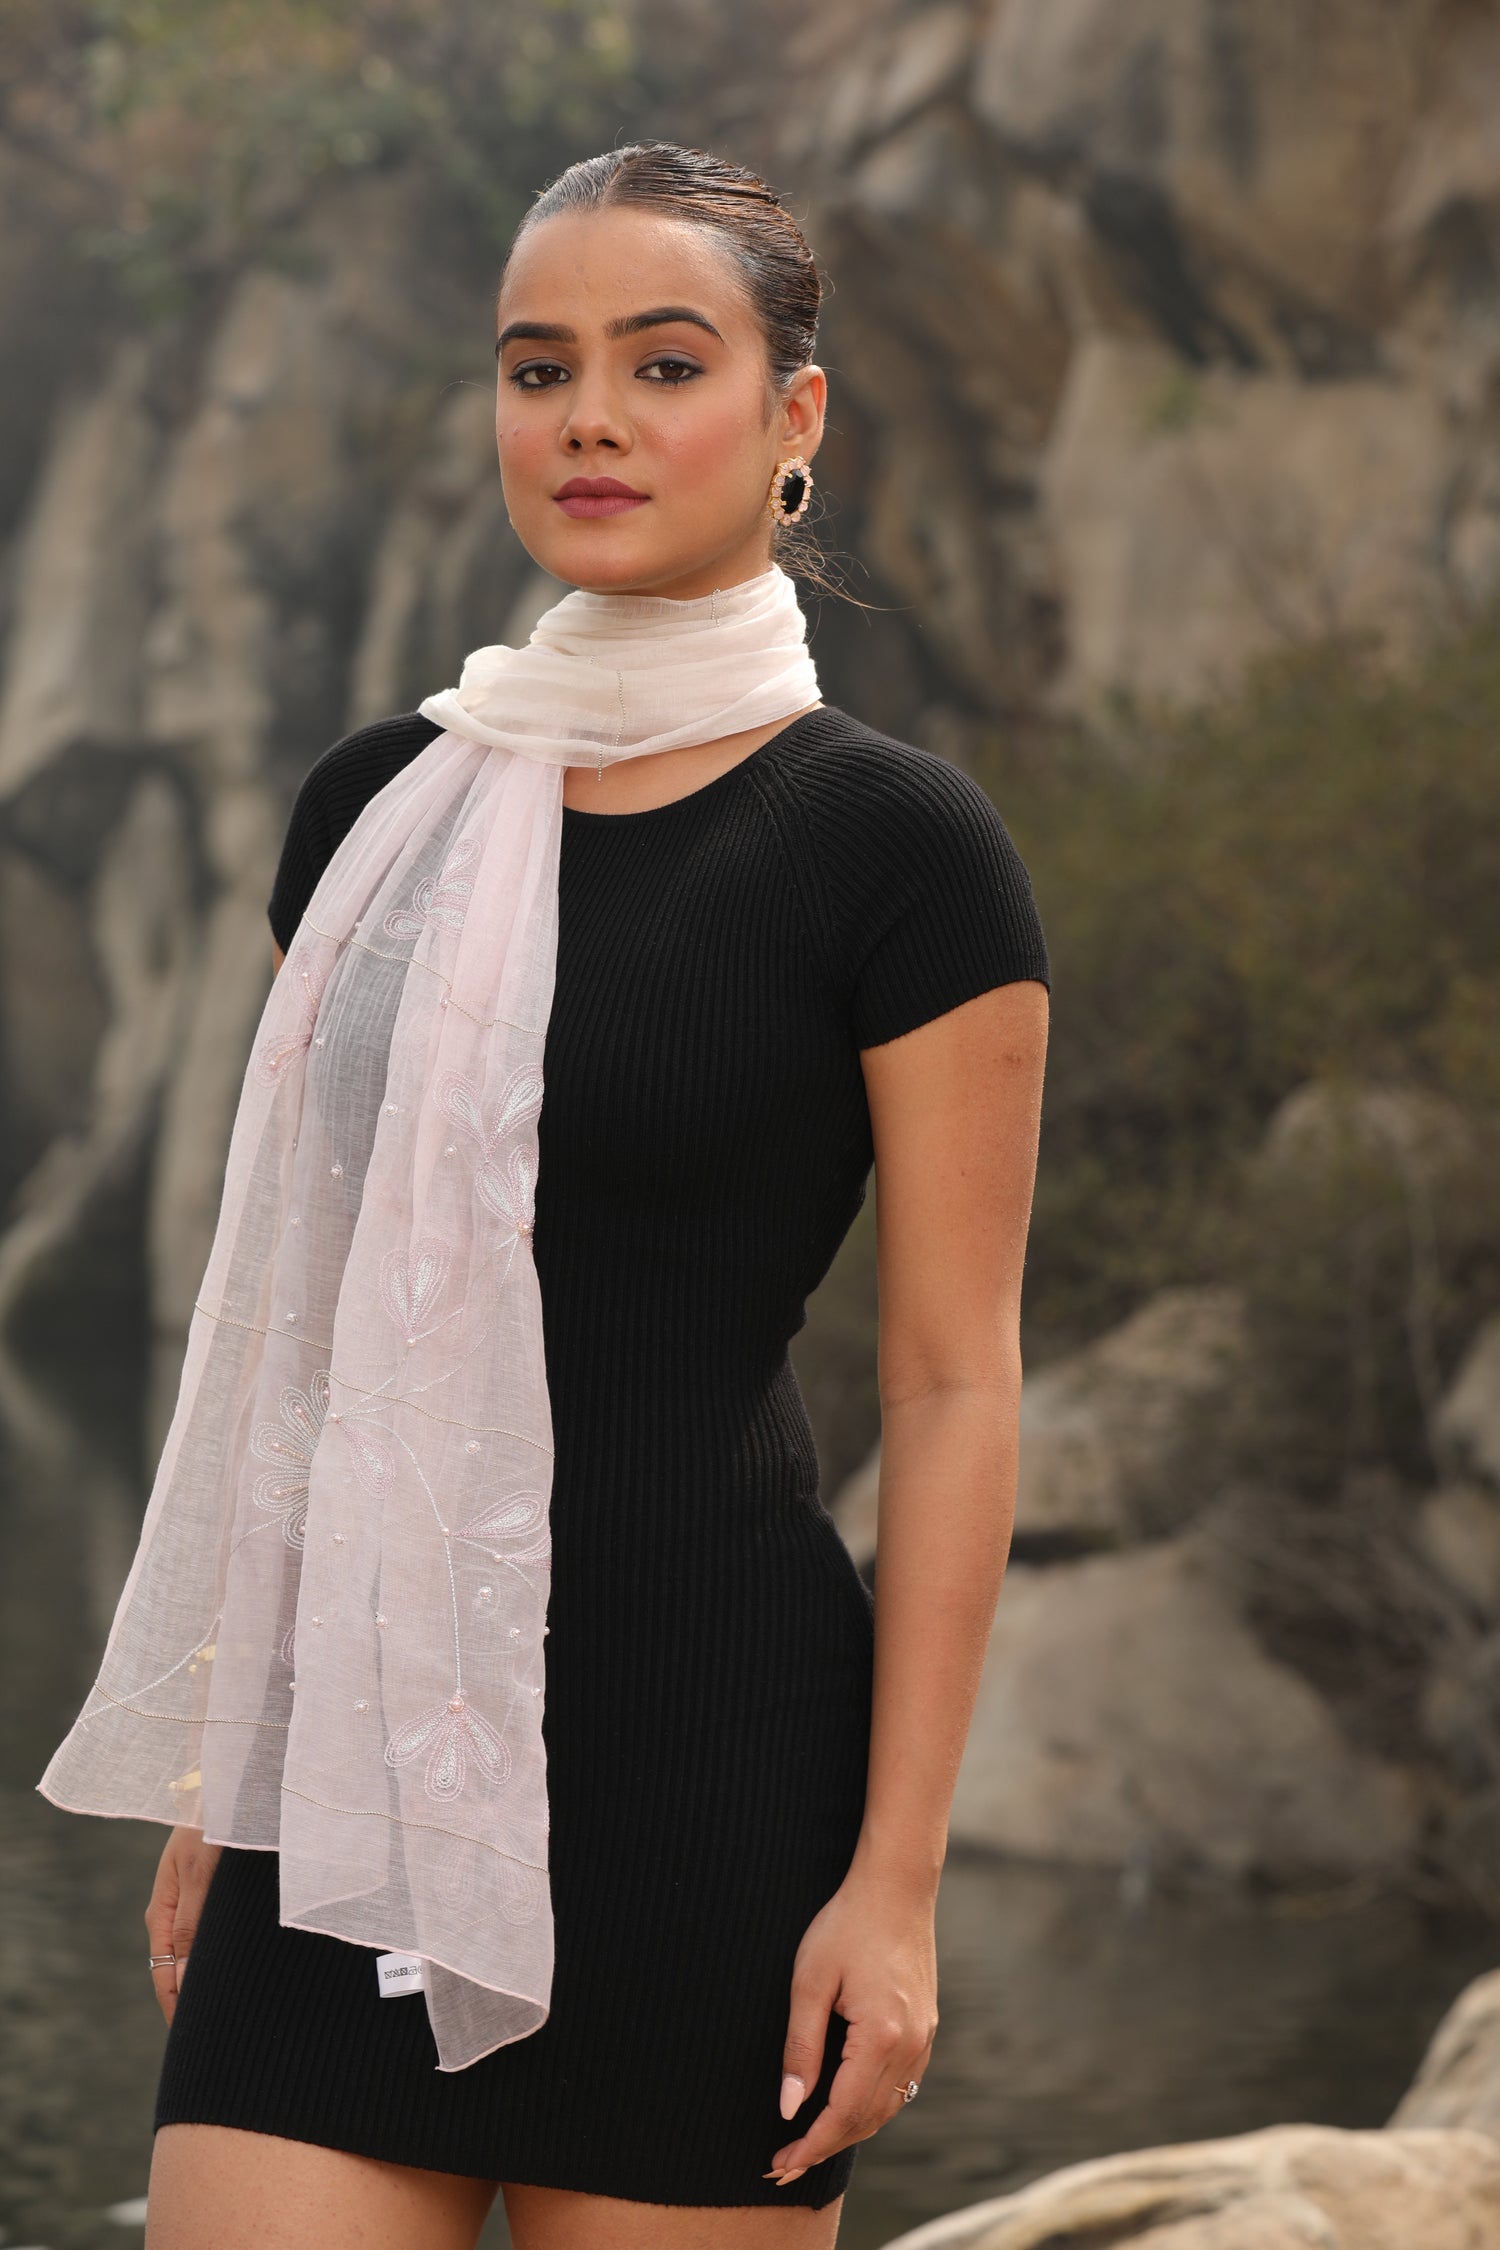 Wrap yourself in elegance with Modarta's lightweight pink scarf, adorned with delicate hand-embroidered floral motifs. Perfect for women seeking sophisticated headscarves or fashionable cotton scarves for any occasion.